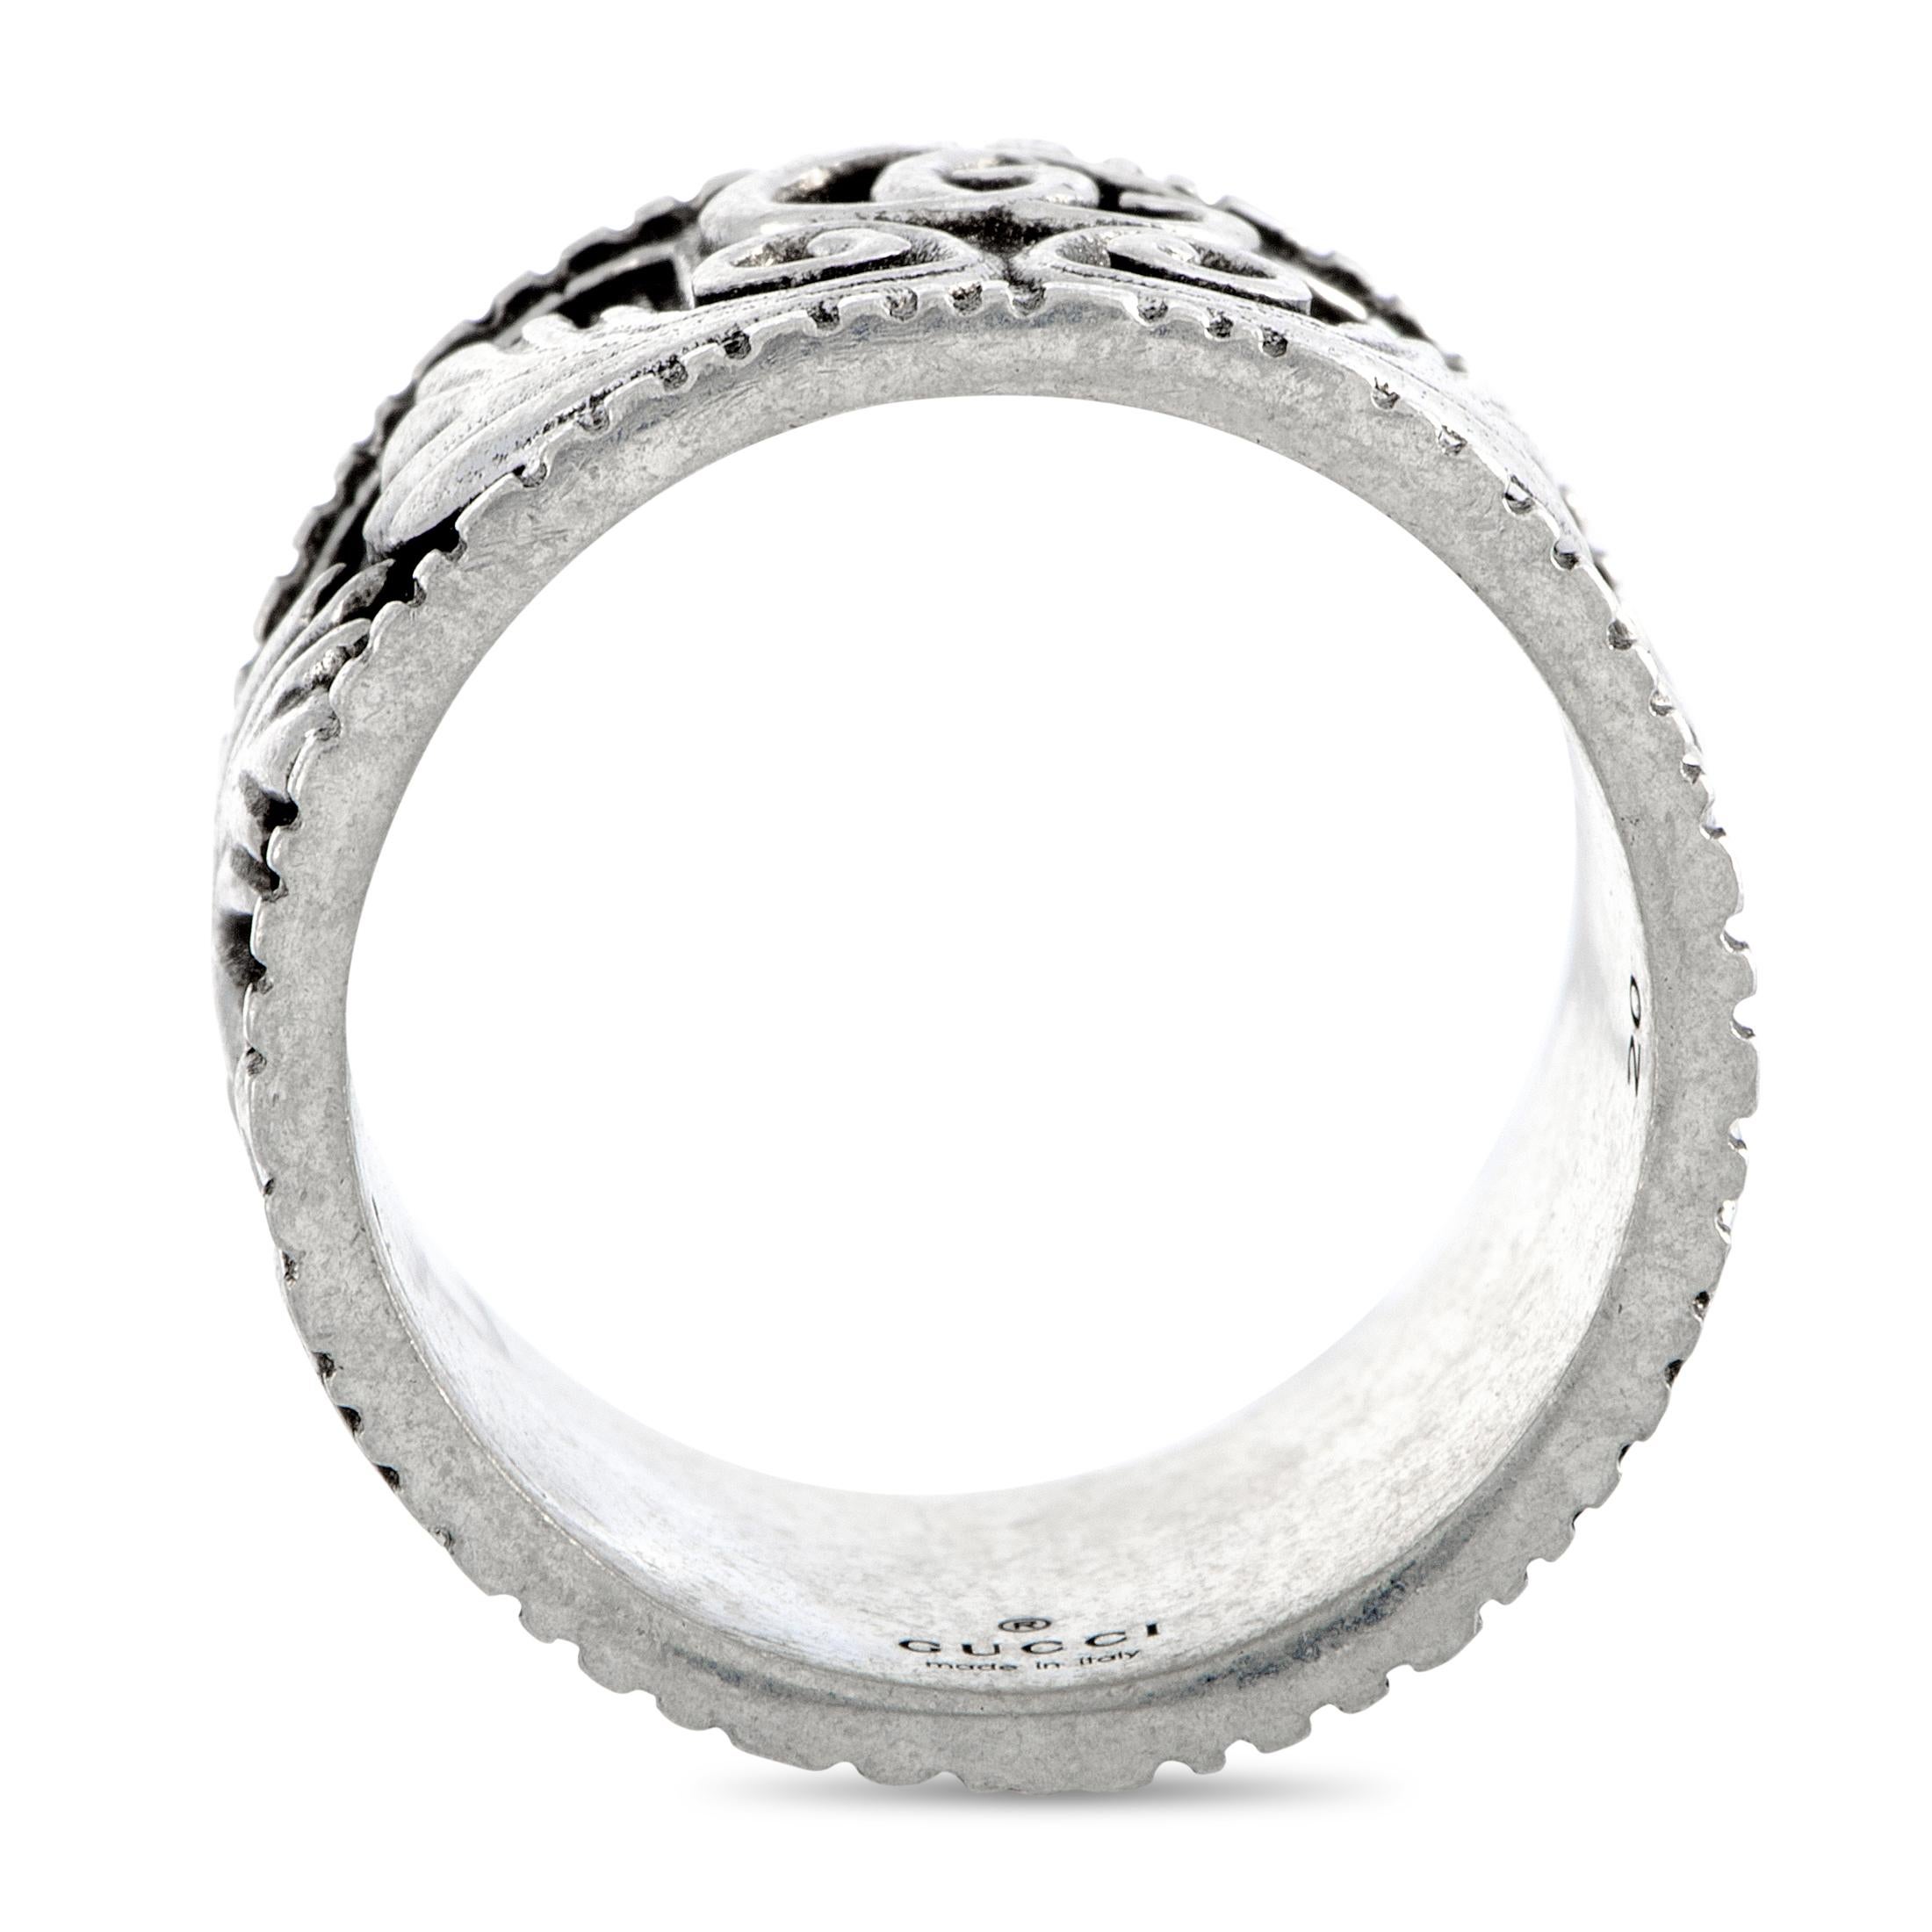 The Gucci “GG Marmont” ring is crafted from aged sterling silver and weighs 14.8 grams, boasting band thickness of 15 mm.
 
 This item is offered in brand new condition and includes the manufacturer’s box and papers.